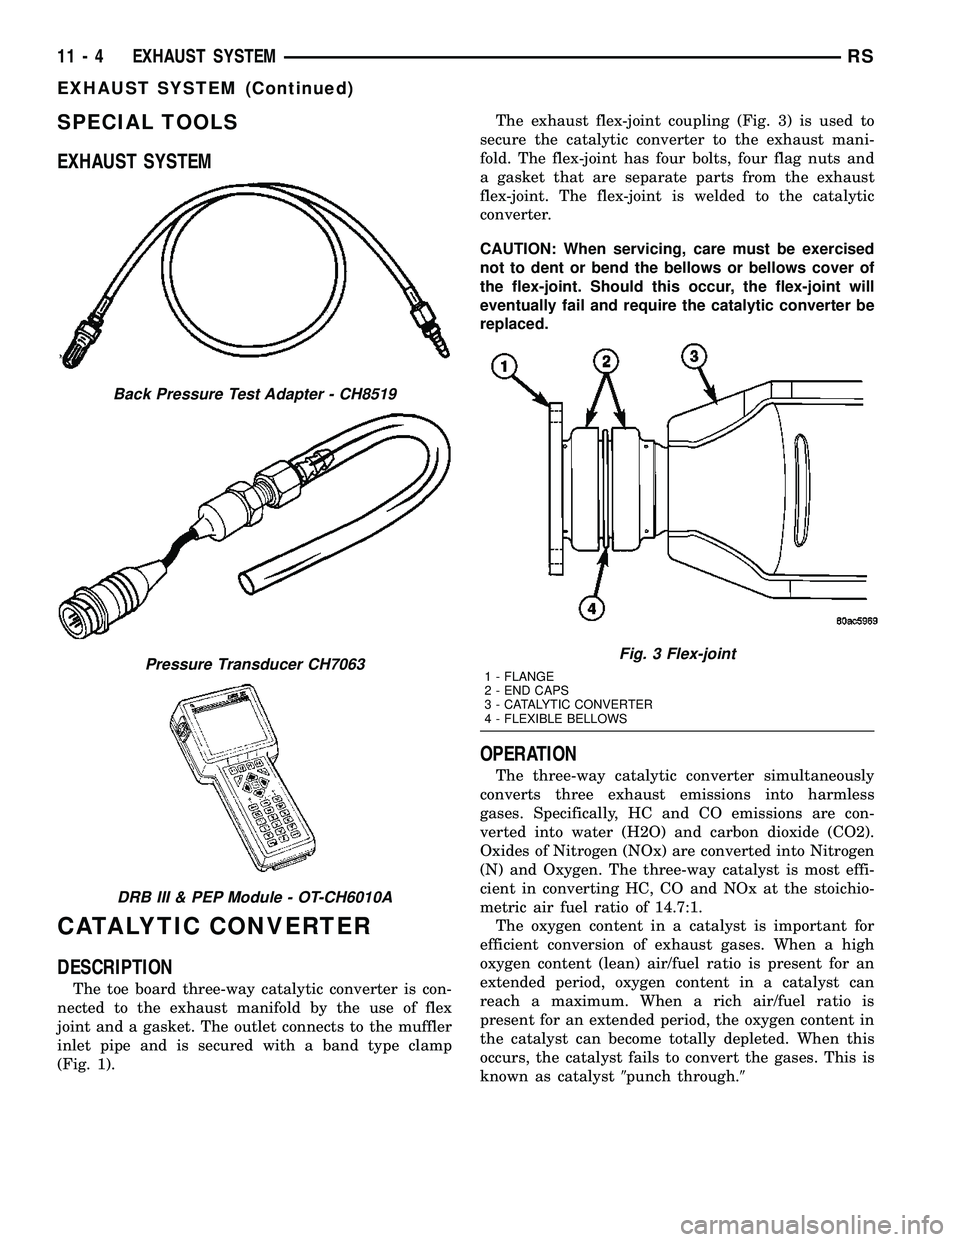 CHRYSLER VOYAGER 2005  Service Manual SPECIAL TOOLS
EXHAUST SYSTEM
CATALYTIC CONVERTER
DESCRIPTION
The toe board three-way catalytic converter is con-
nected to the exhaust manifold by the use of flex
joint and a gasket. The outlet connec